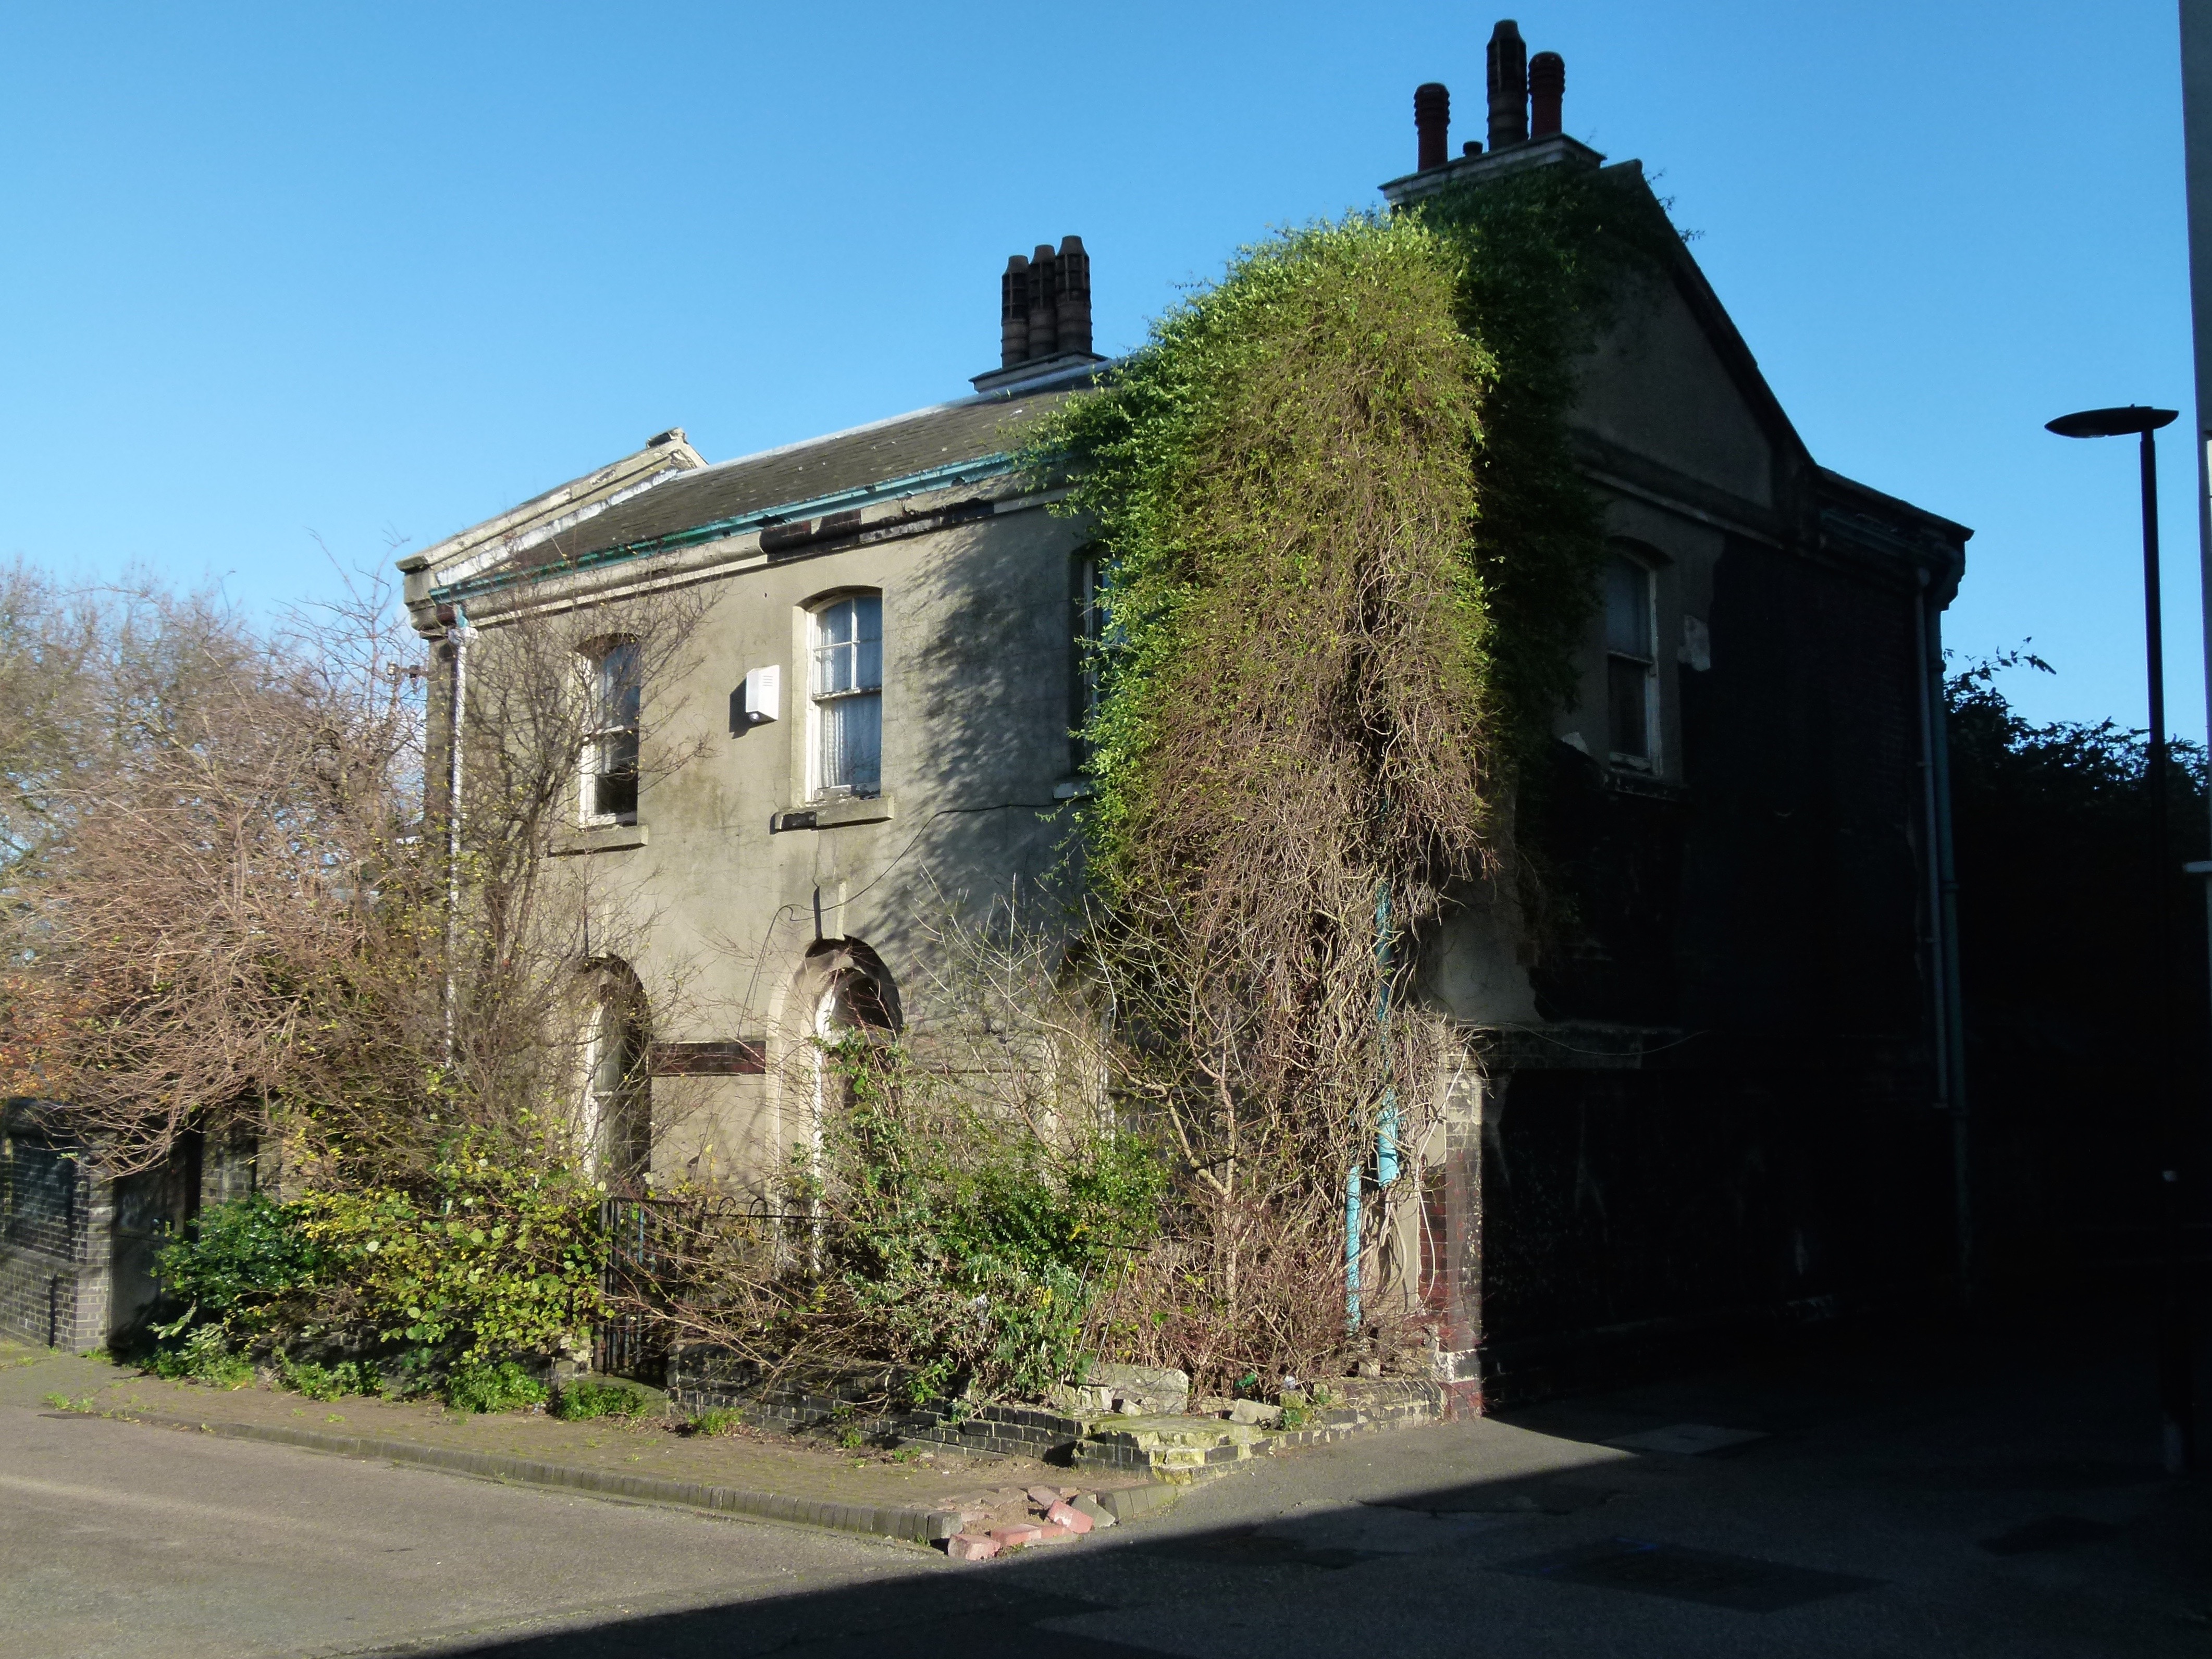 File:London, North-Woolwich, derelict house.jpg - Wikimedia Commons